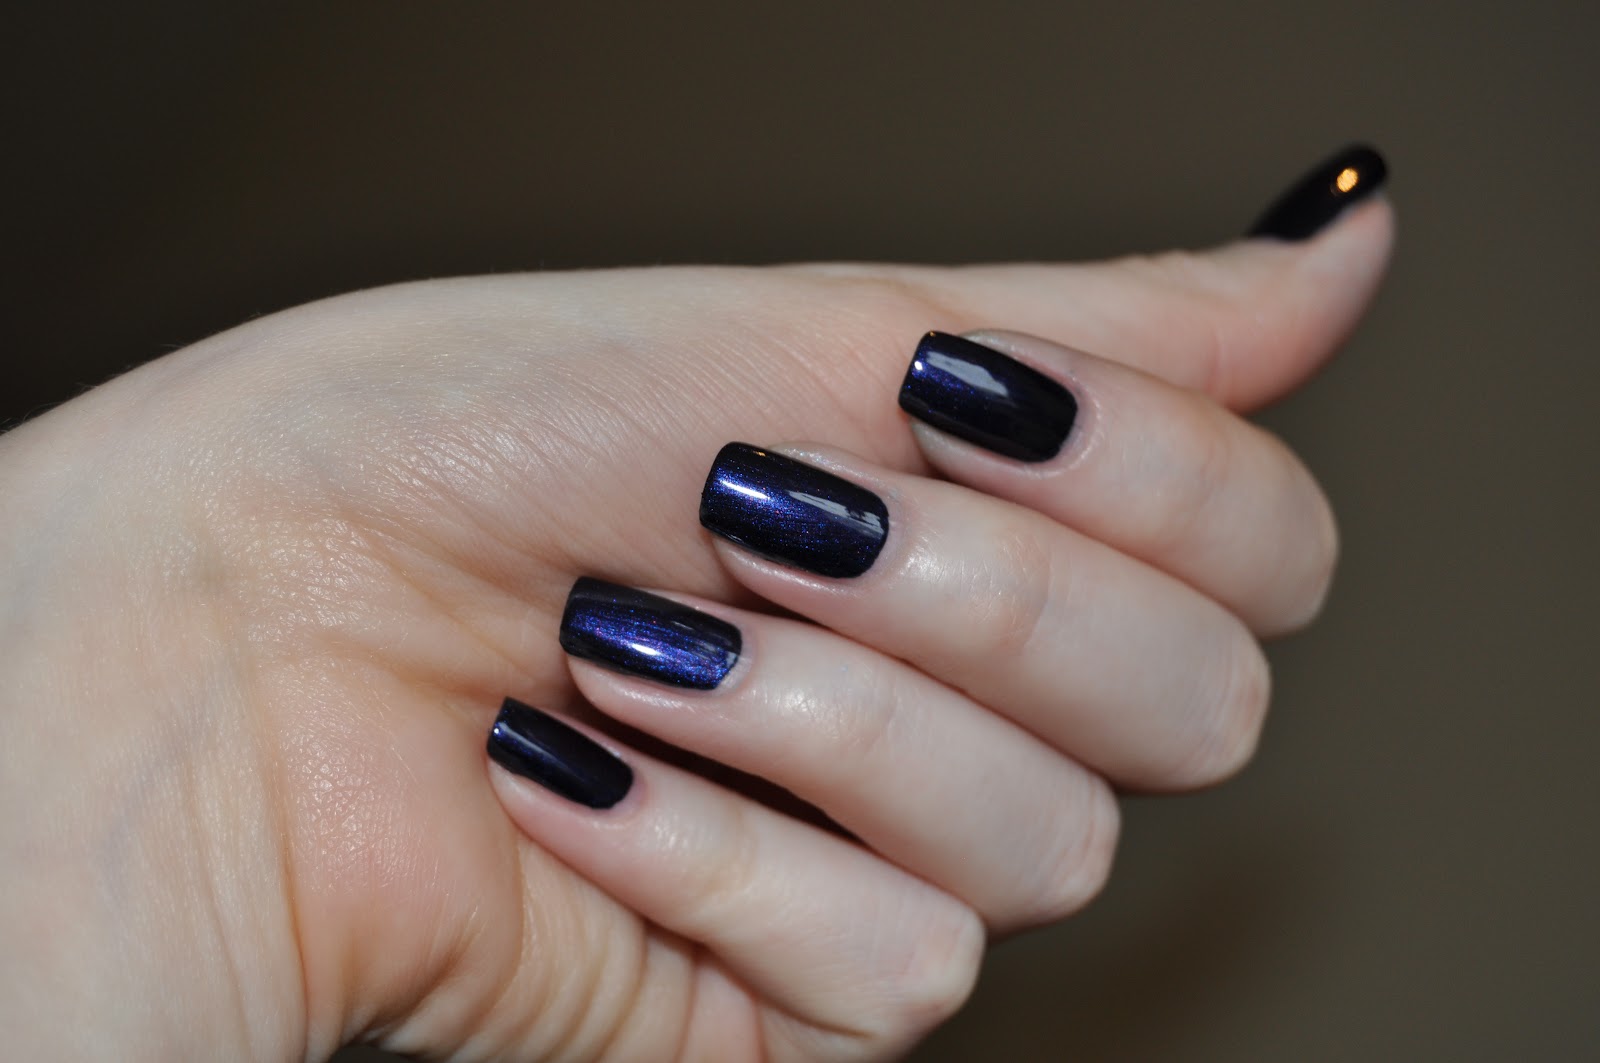 9. OPI Russian Navy - wide 5